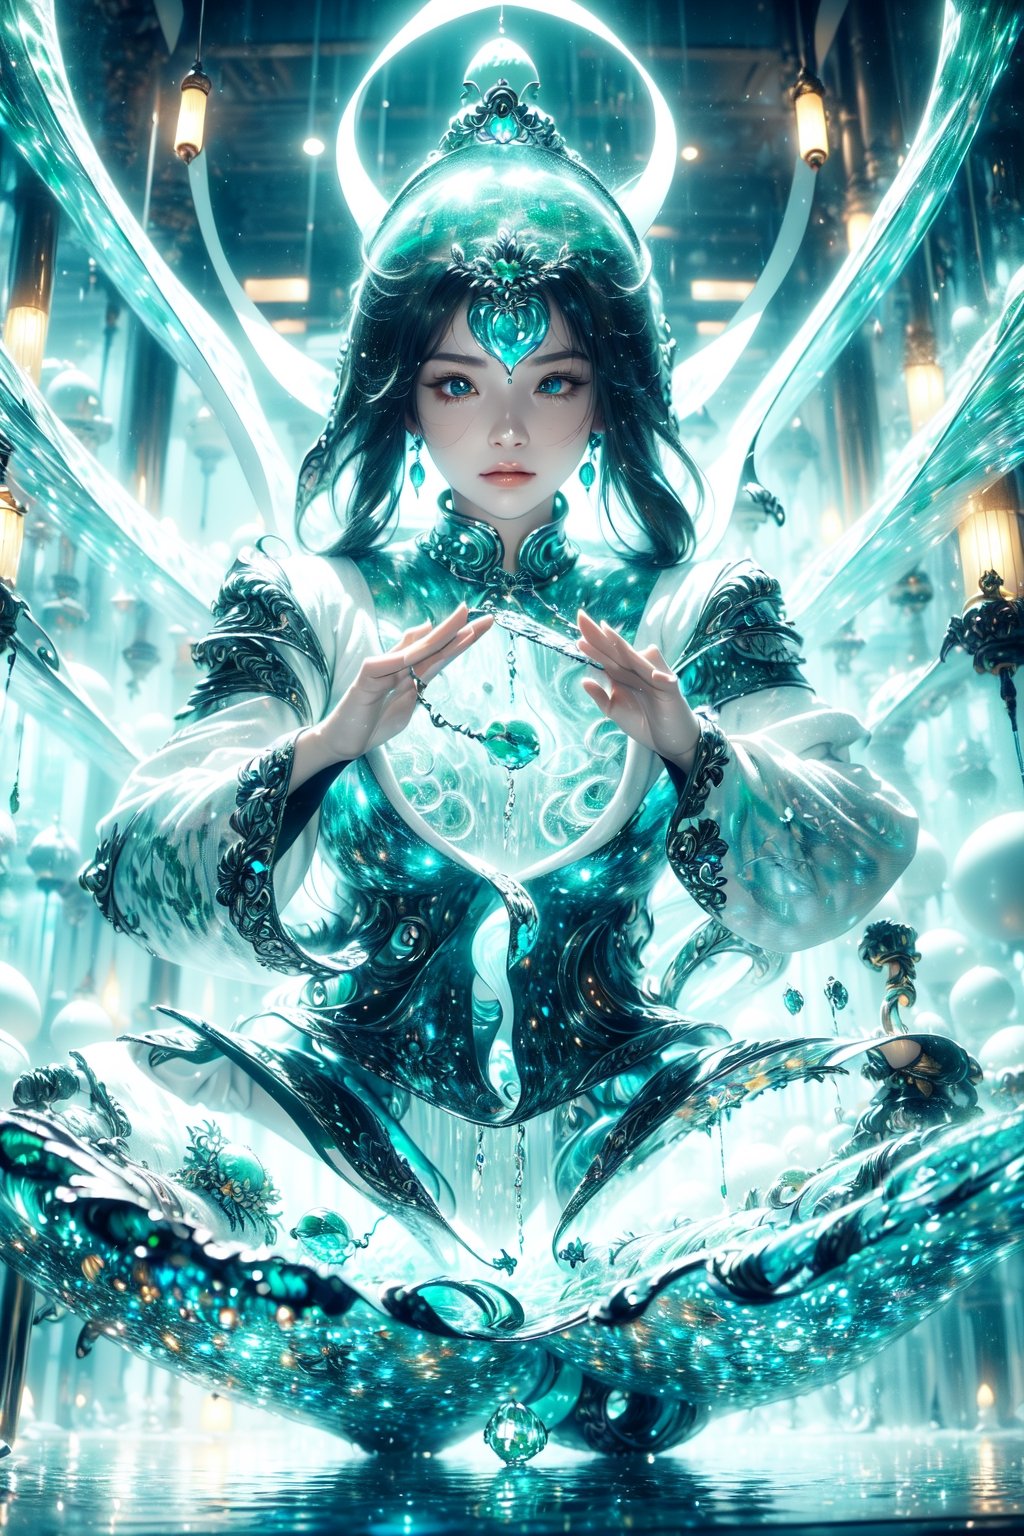 (green and white entanglement), (crystal and silver entanglement),The goddess of water waves her hands to turn the blue energy flow into a yin and yang Tai Chi diagram
